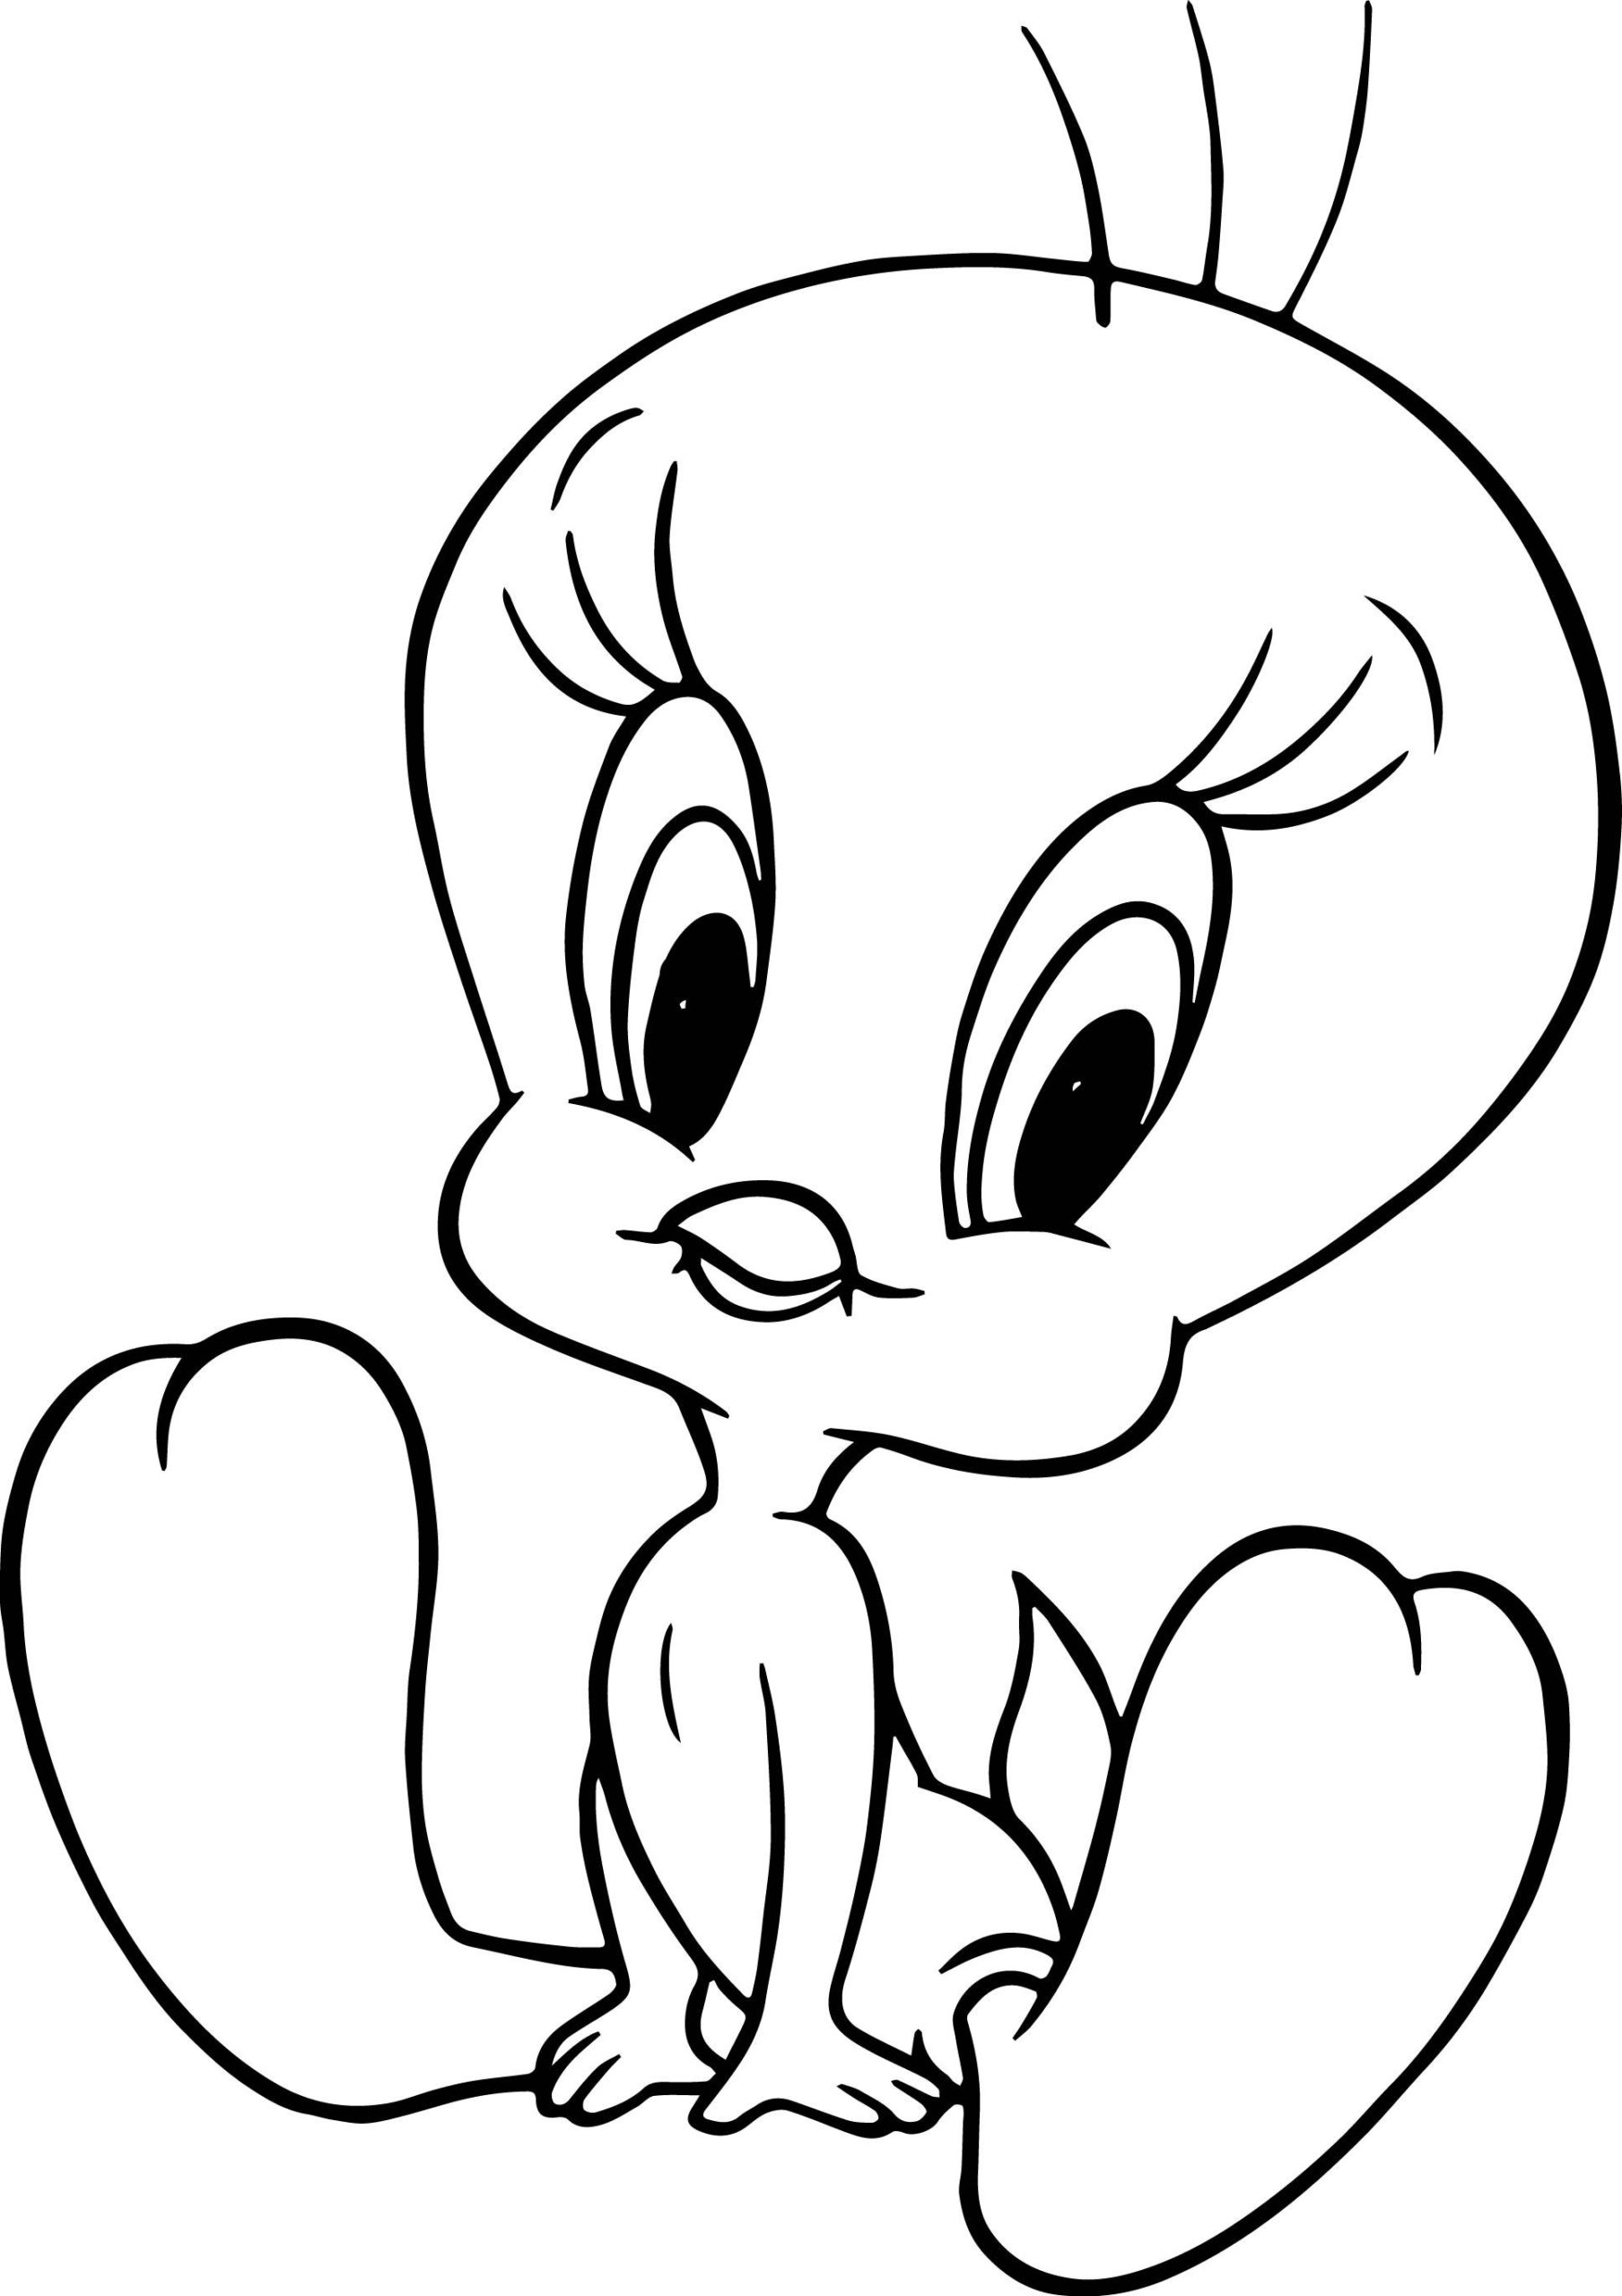 Download Tweety Bird Coloring Pages - Visual Arts Ideas